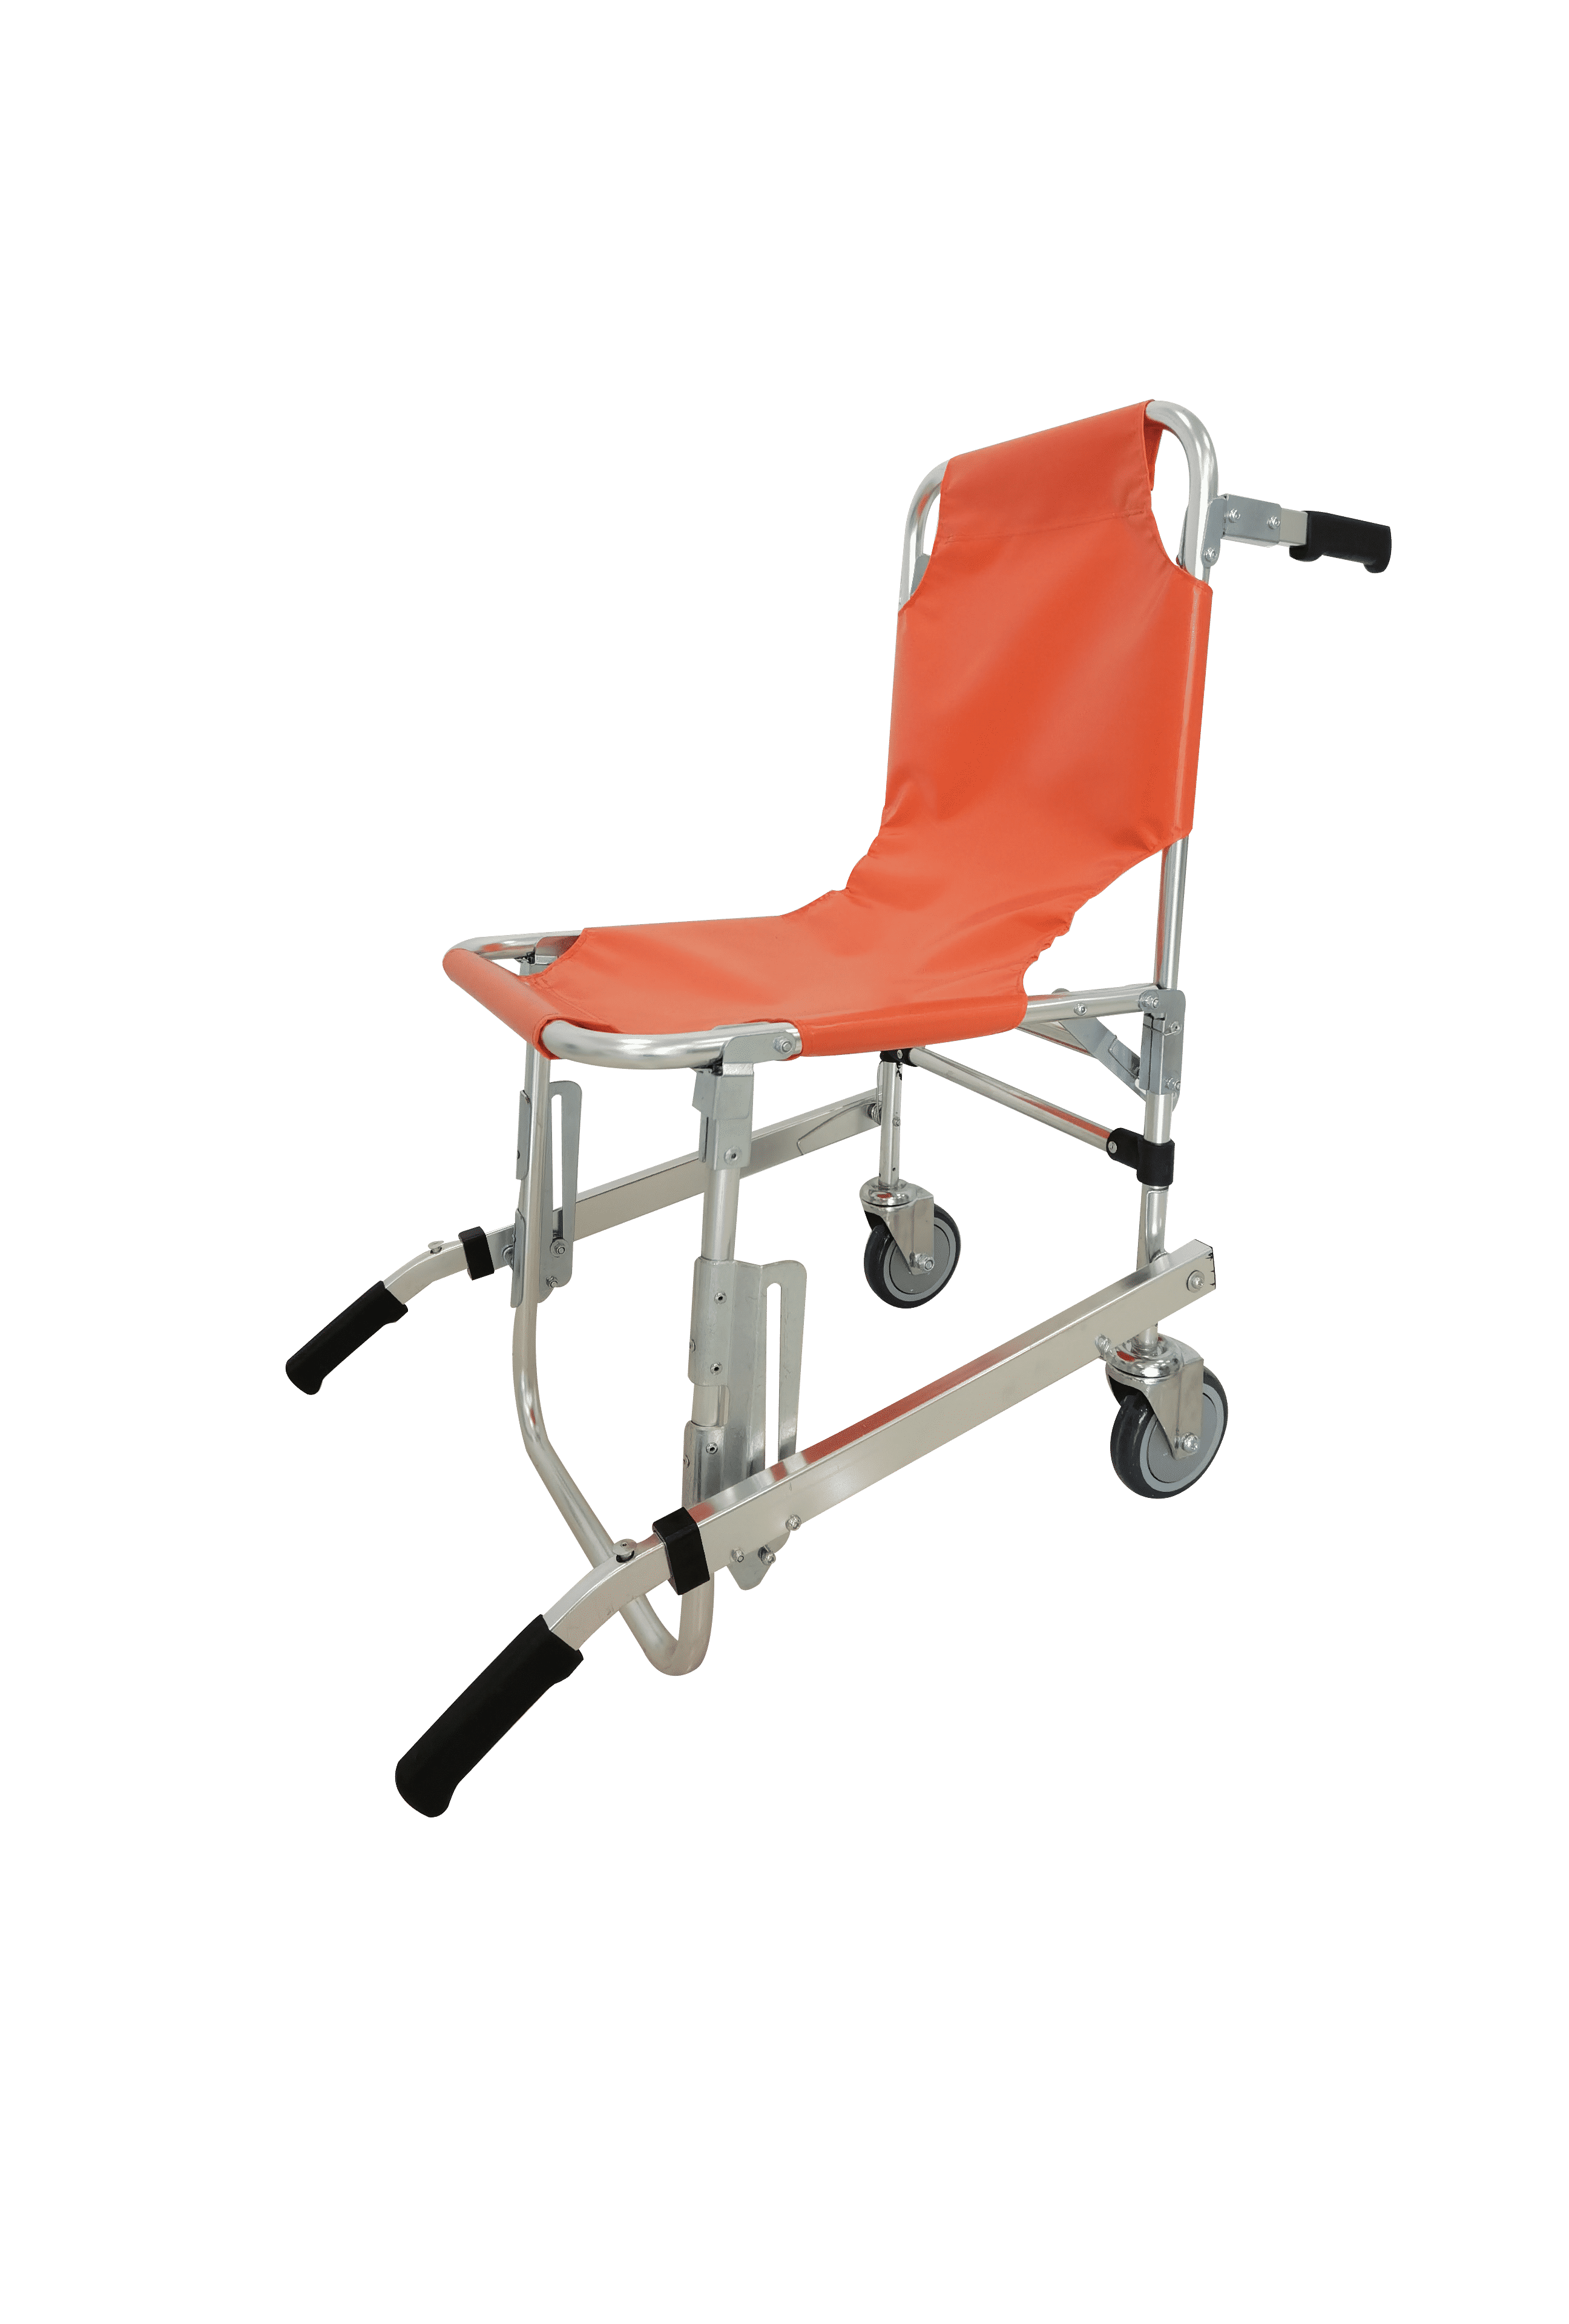 L1 High-strength aluminum alloy stretcher medical staircase stretcher